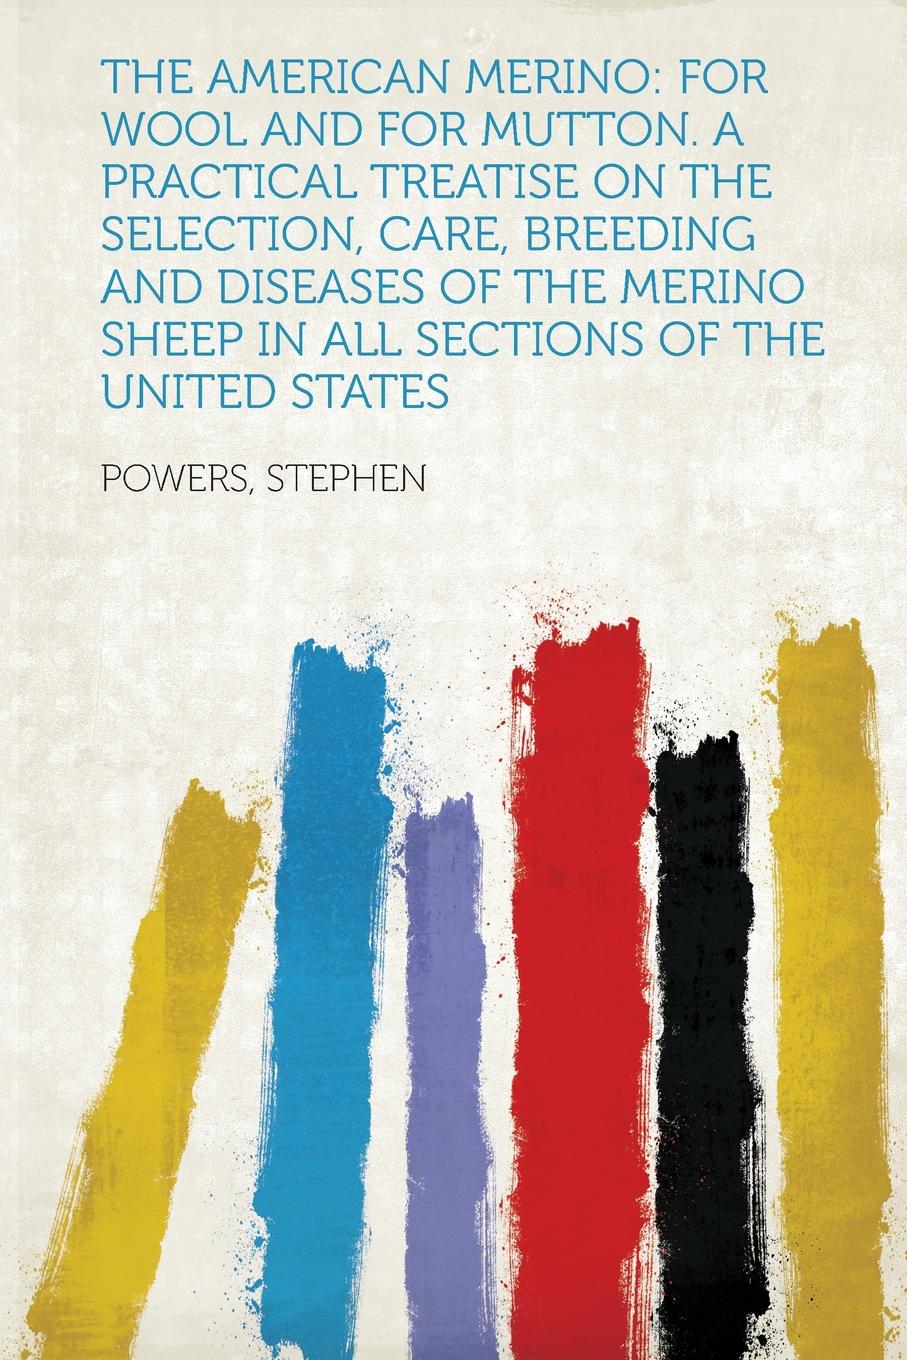 The American Merino. for Wool and for Mutton. A Practical Treatise on the Selection, Care, Breeding and Diseases of the Merino Sheep in All Sections of the United States